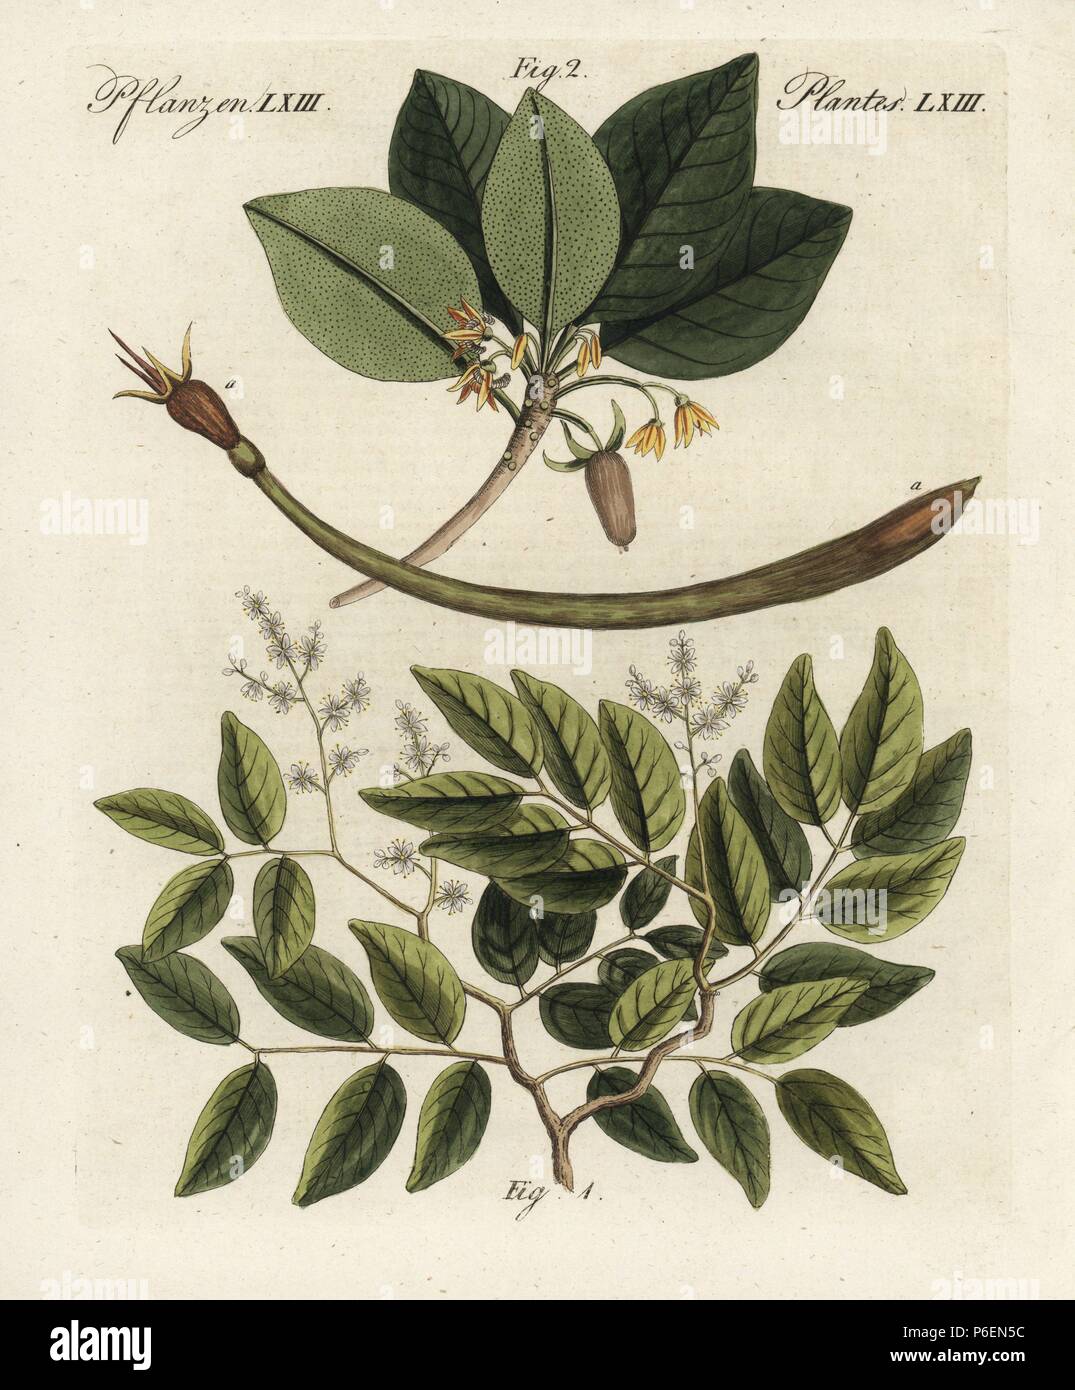 Copaiba balsam tree, Copaifera officinalis 1, and red mangrove, Rhizophora mangle 2. Handcoloured copperplate engraving from Bertuch's 'Bilderbuch fur Kinder' (Picture Book for Children), Weimar, 1798. Friedrich Johann Bertuch (1747-1822) was a German publisher and man of arts most famous for his 12-volume encyclopedia for children illustrated with 1,200 engraved plates on natural history, science, costume, mythology, etc., published from 1790-1830. Stock Photo